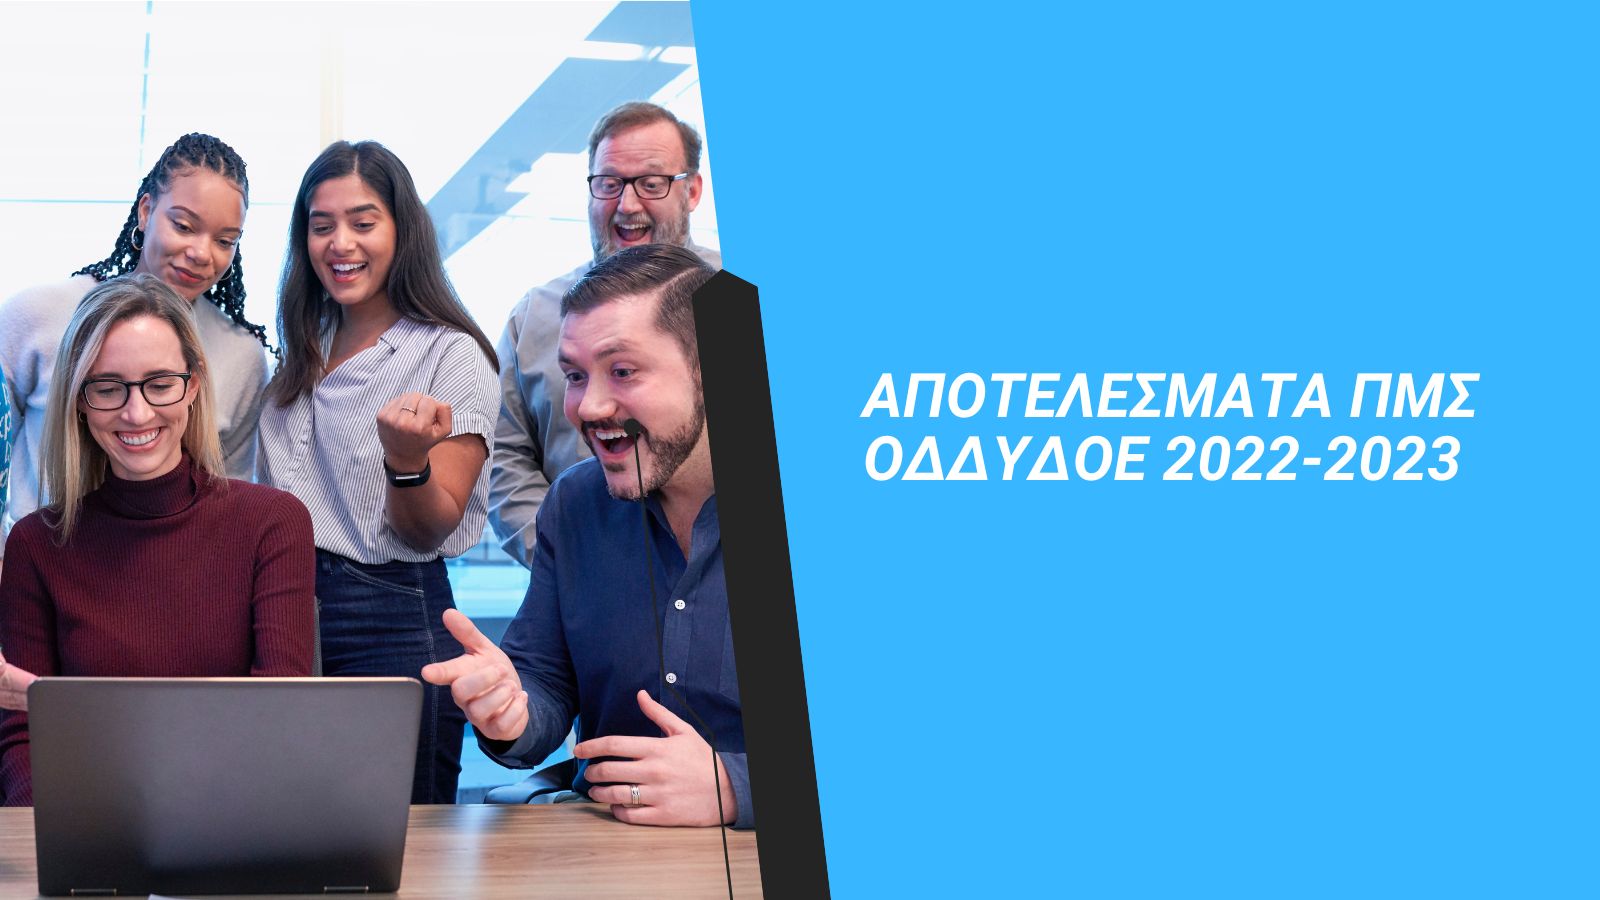 Read more about the article ΑΠΟΤΕΛΕΣΜΑΤΑ ΠΜΣ ΟΔΔΥΔΟΕ 2022-2023